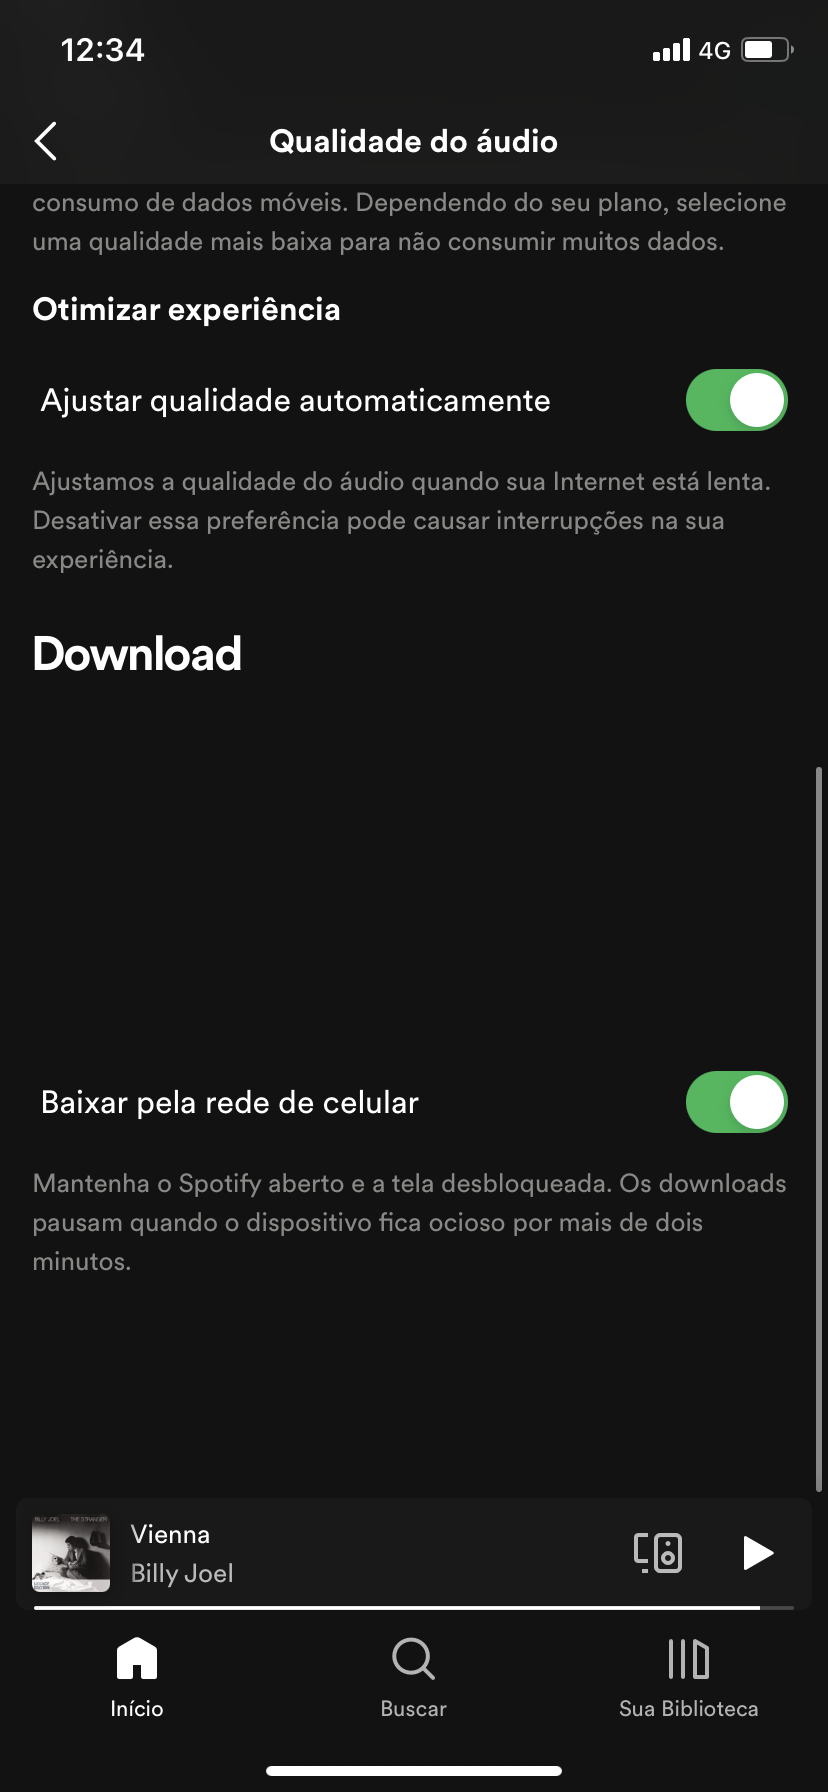 Download Audio Quality on iOS does not list any op - The